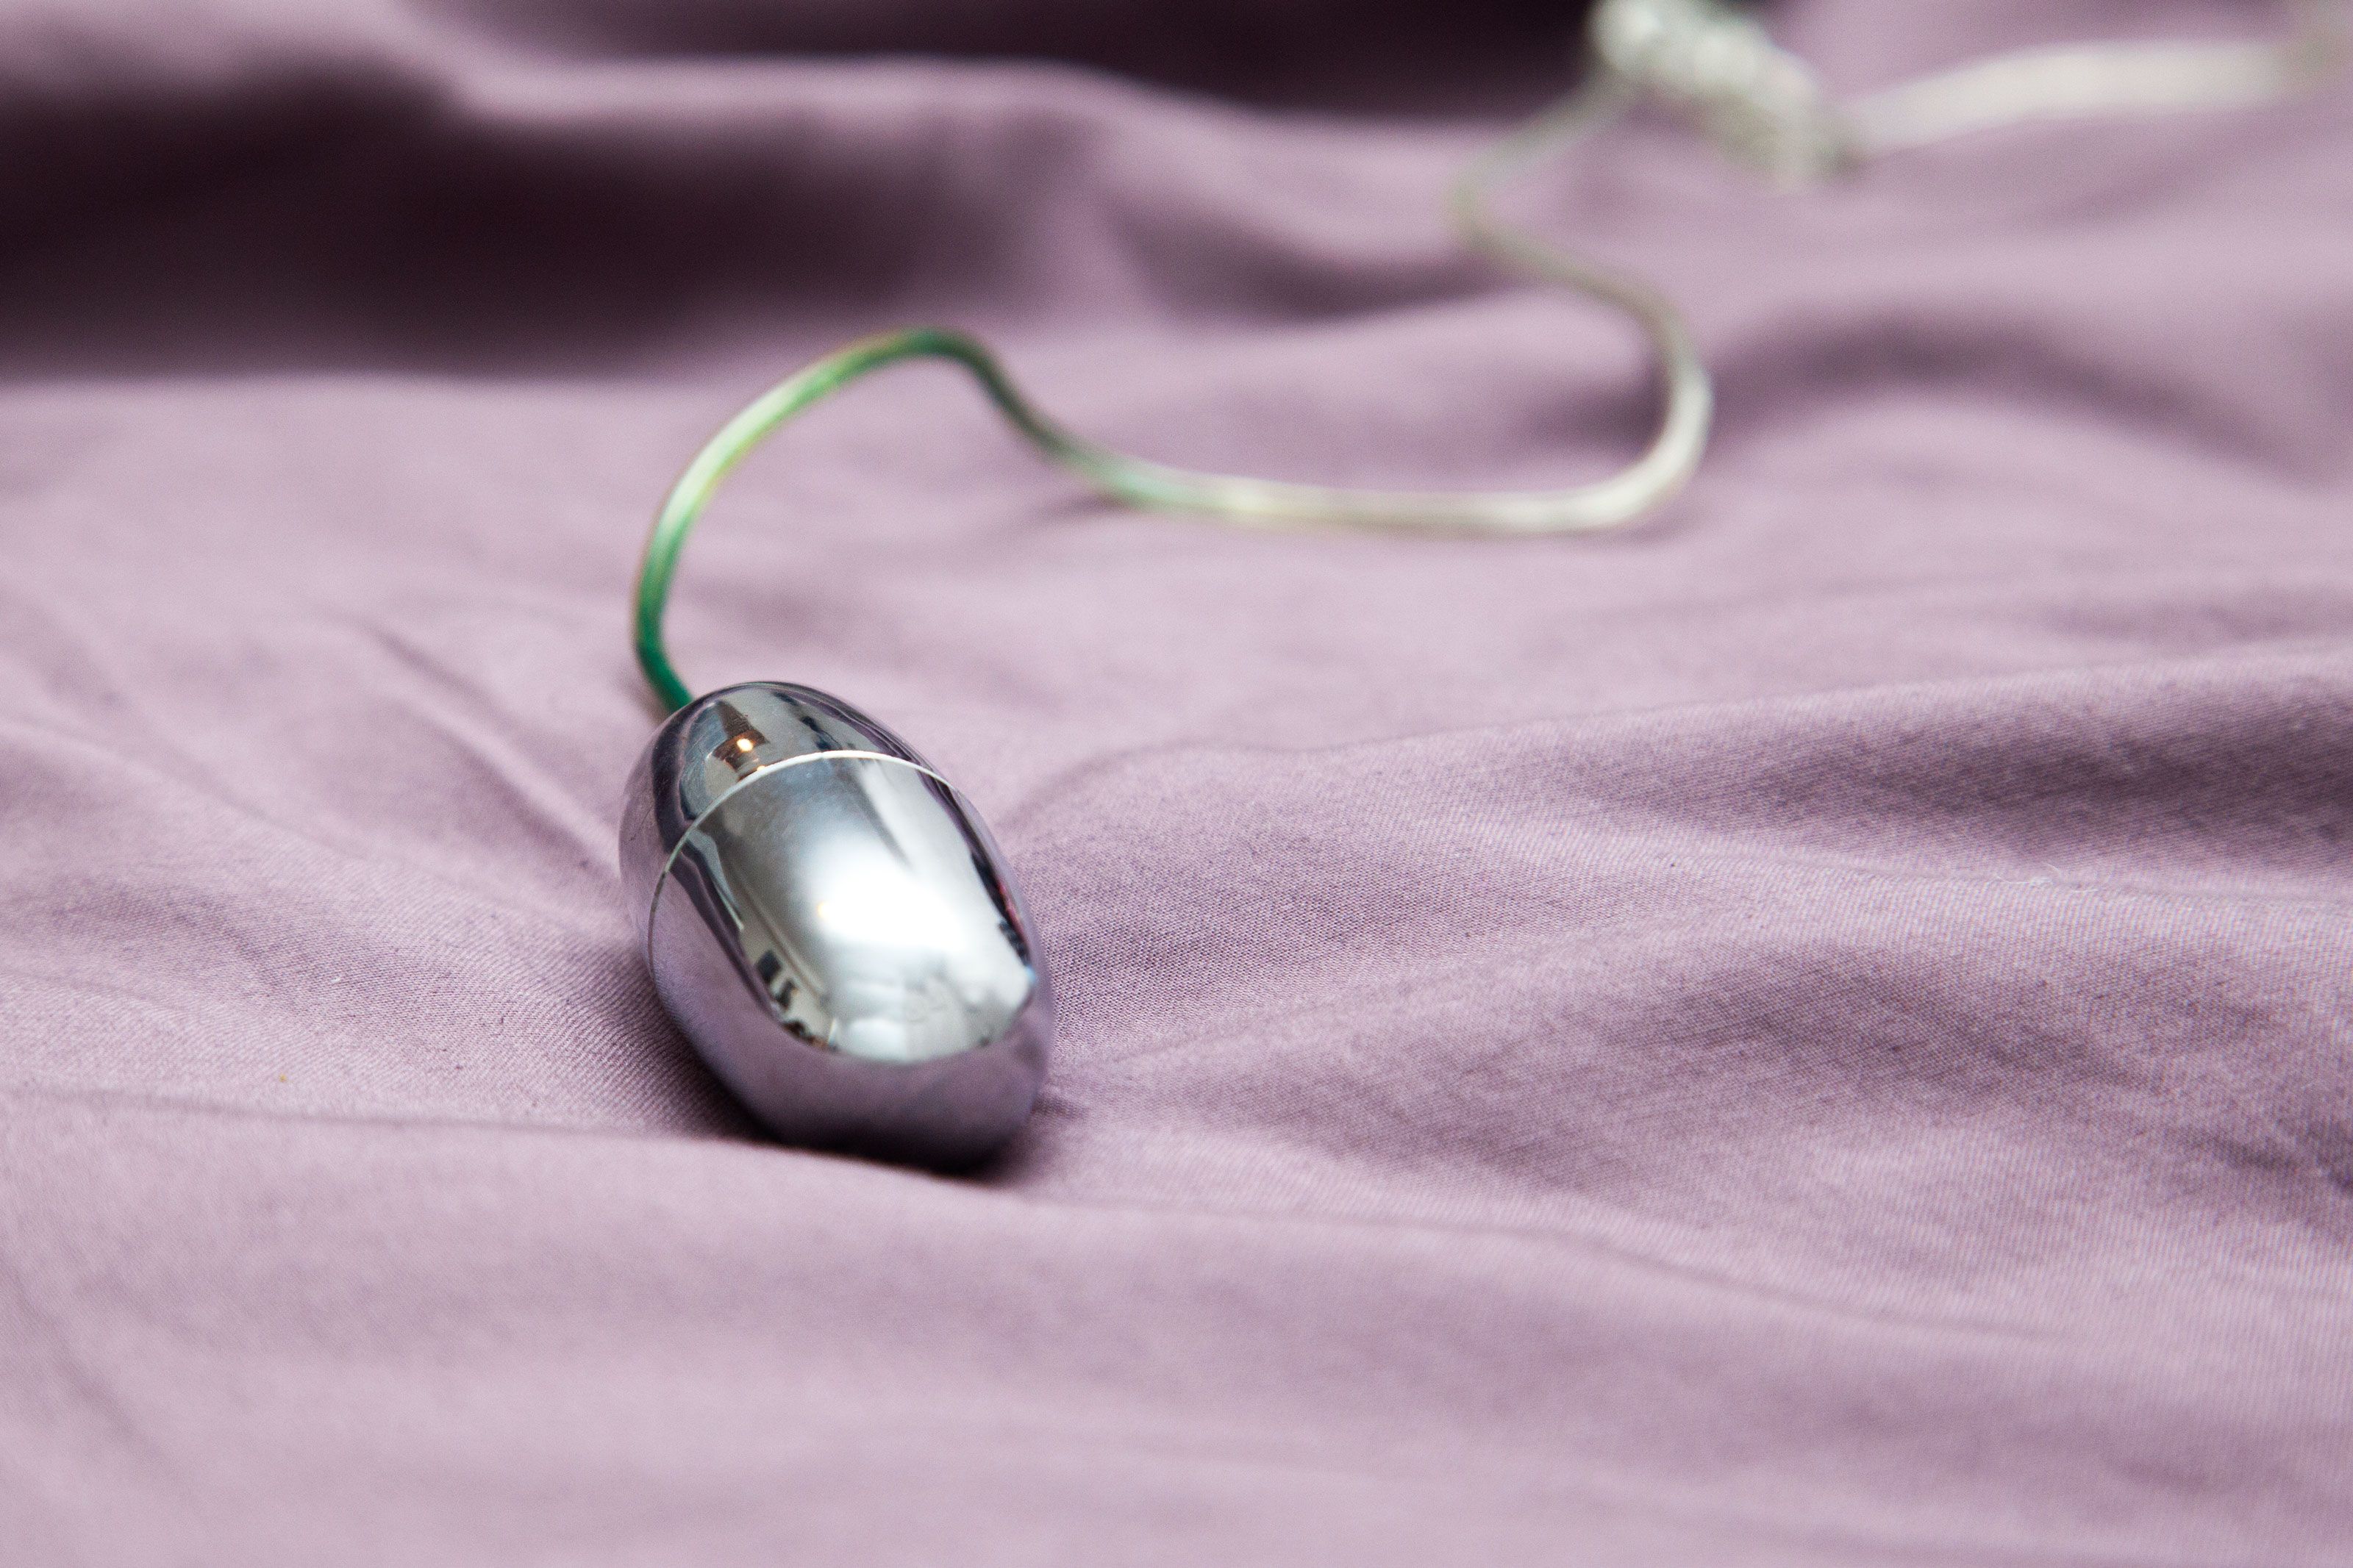 Meet the Love Egg, the Sex Toy That Can Up Your Oral Sex Game